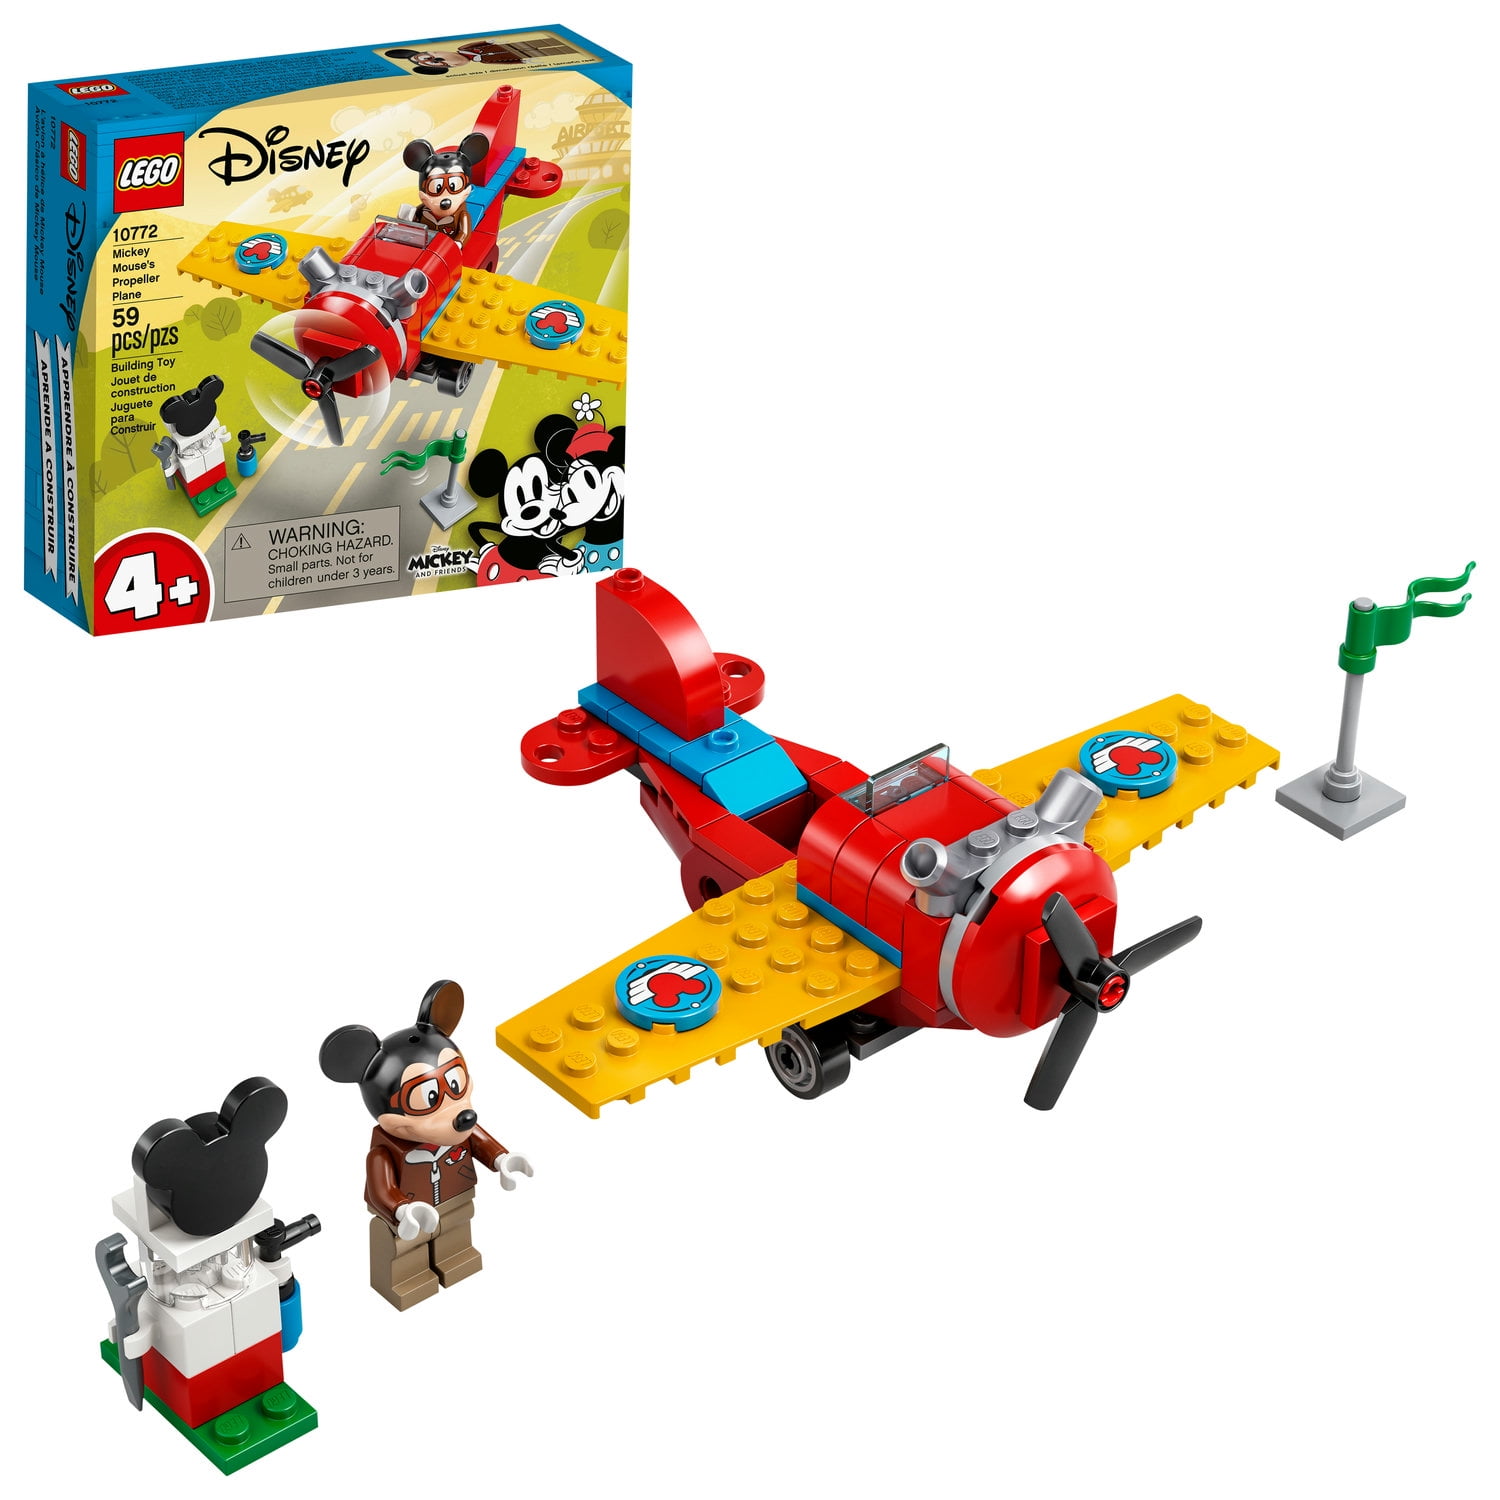 LEGO Mickey Mouse's Propeller Plane 10772 Building Set (59 Pieces)